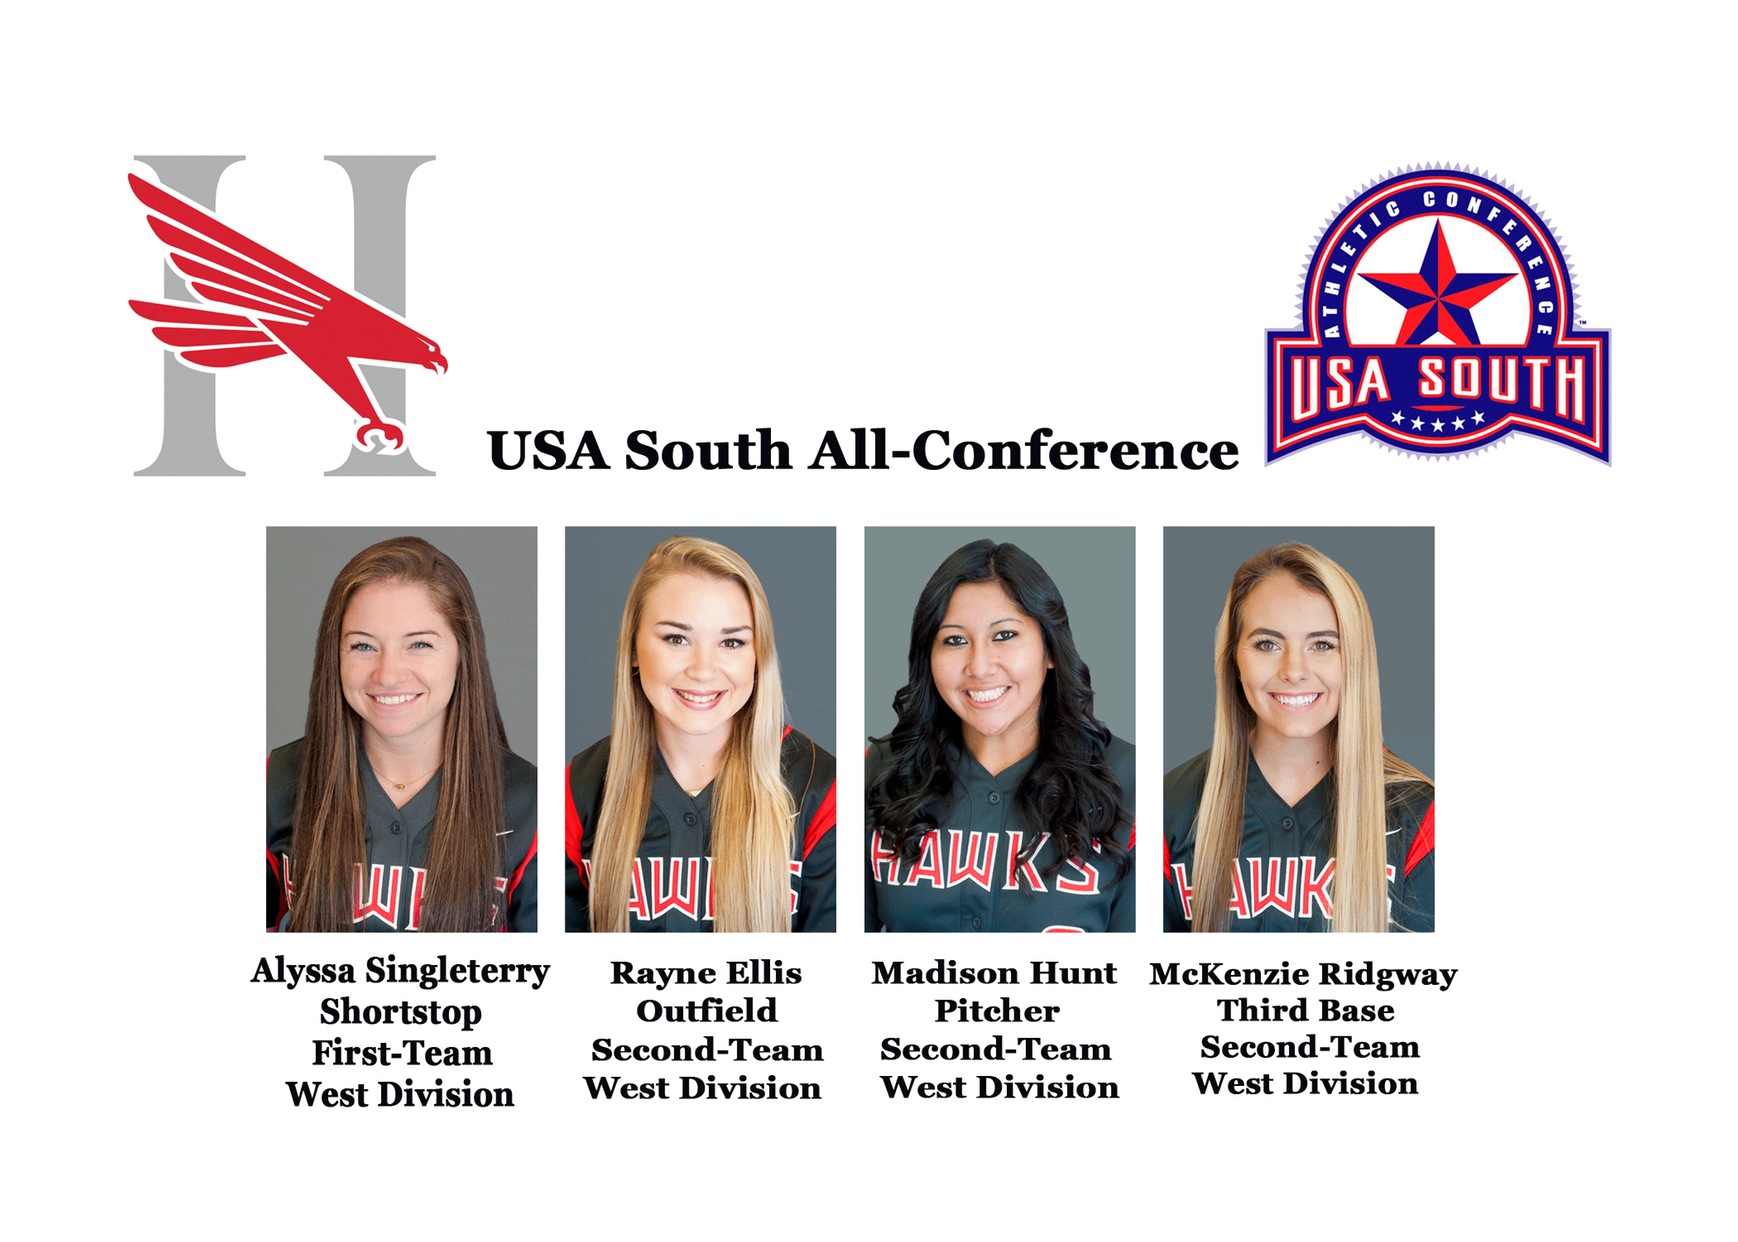 Four Hawks earn West Division honors from USA South